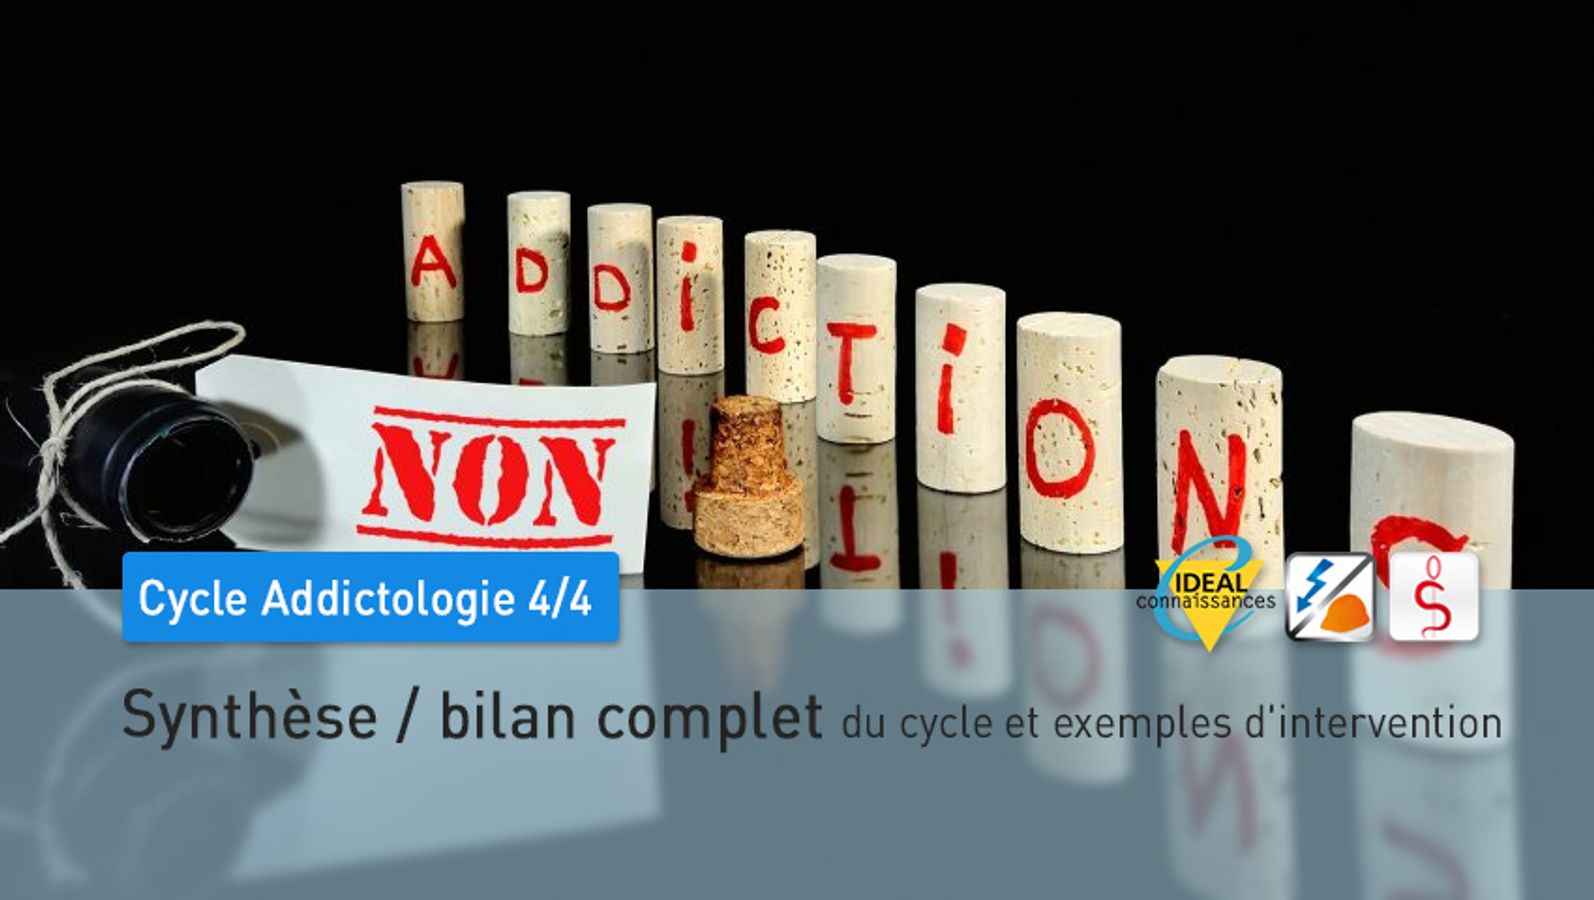 Cycle Addictologie - 4/4 -  Synthèse / bilan complet du cycle et exemples d'intervention